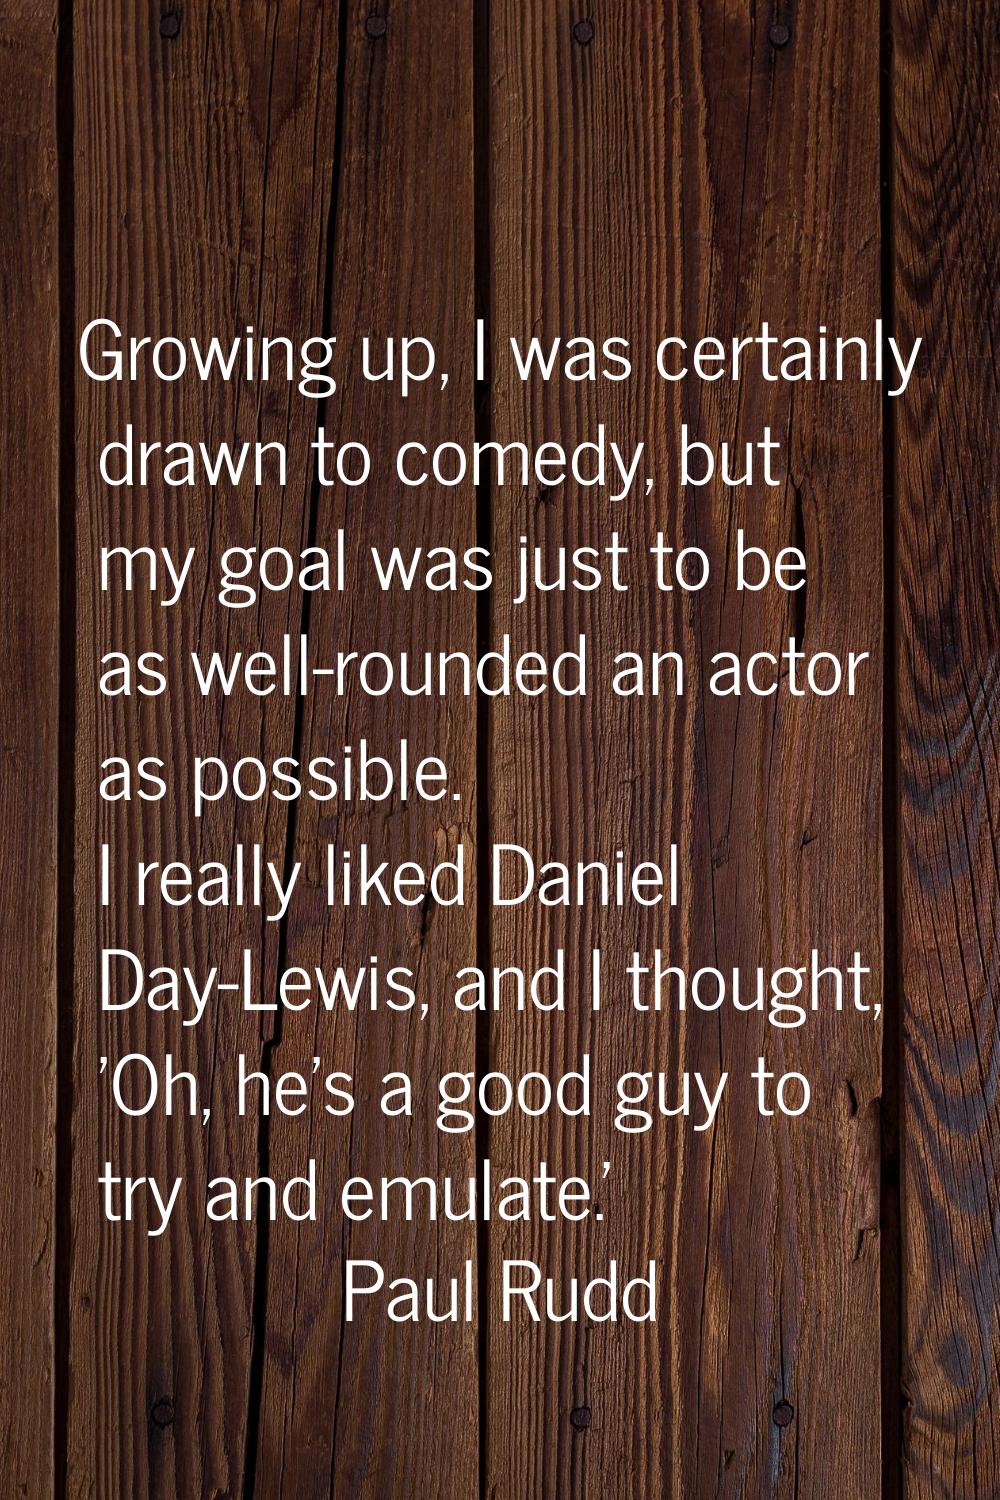 Growing up, I was certainly drawn to comedy, but my goal was just to be as well-rounded an actor as